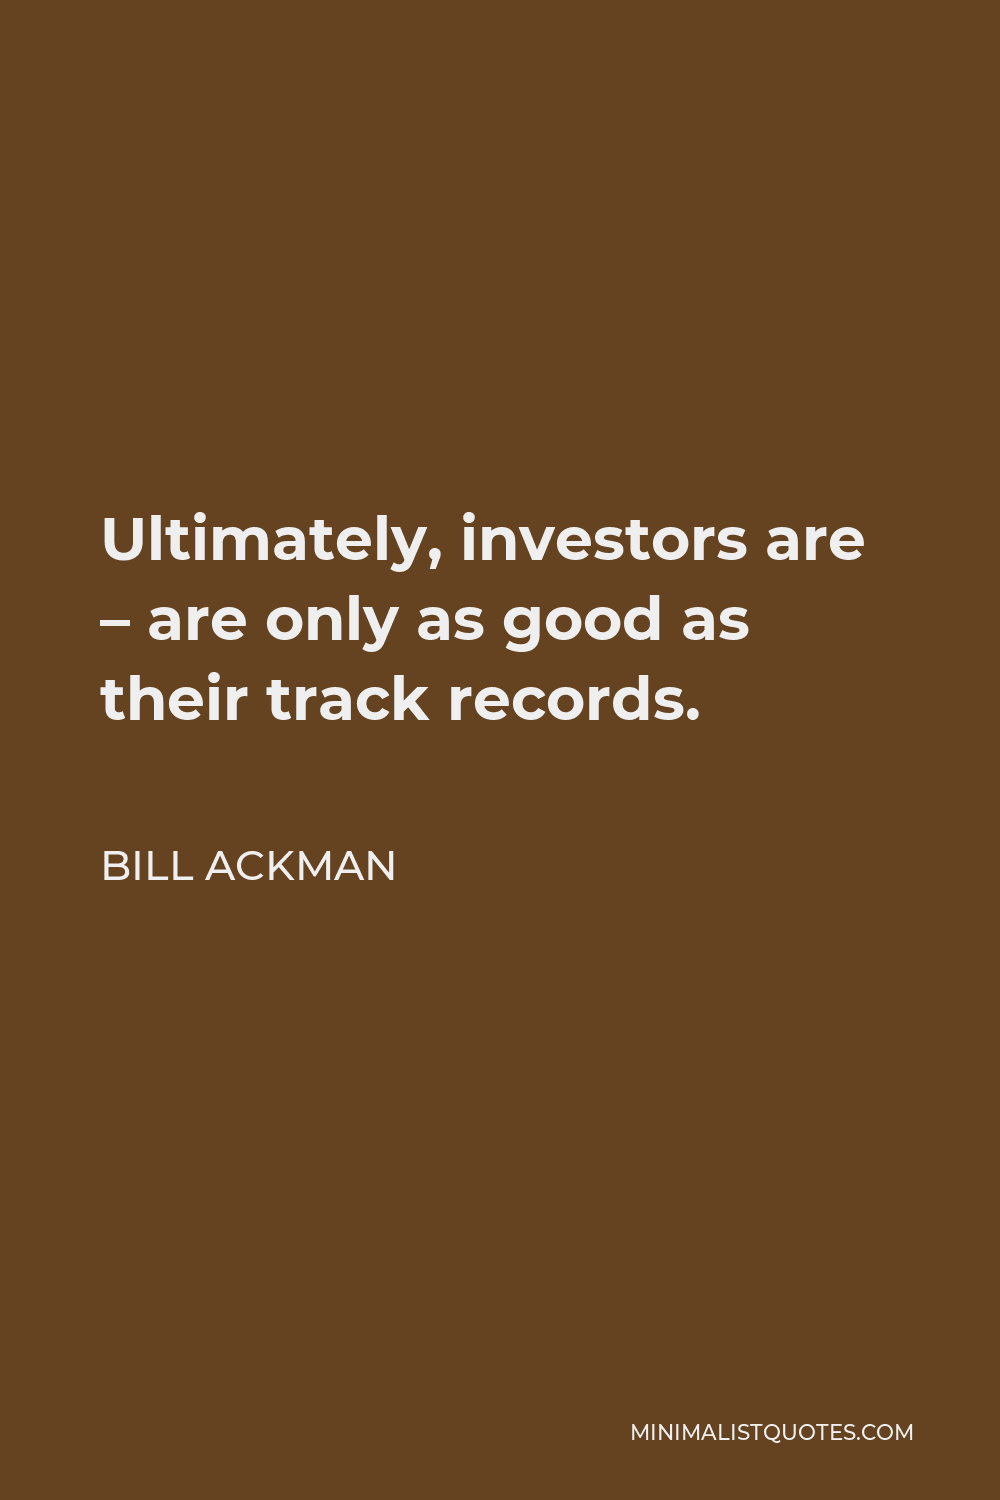 Bill Ackman Quote - Ultimately, investors are – are only as good as their track records.